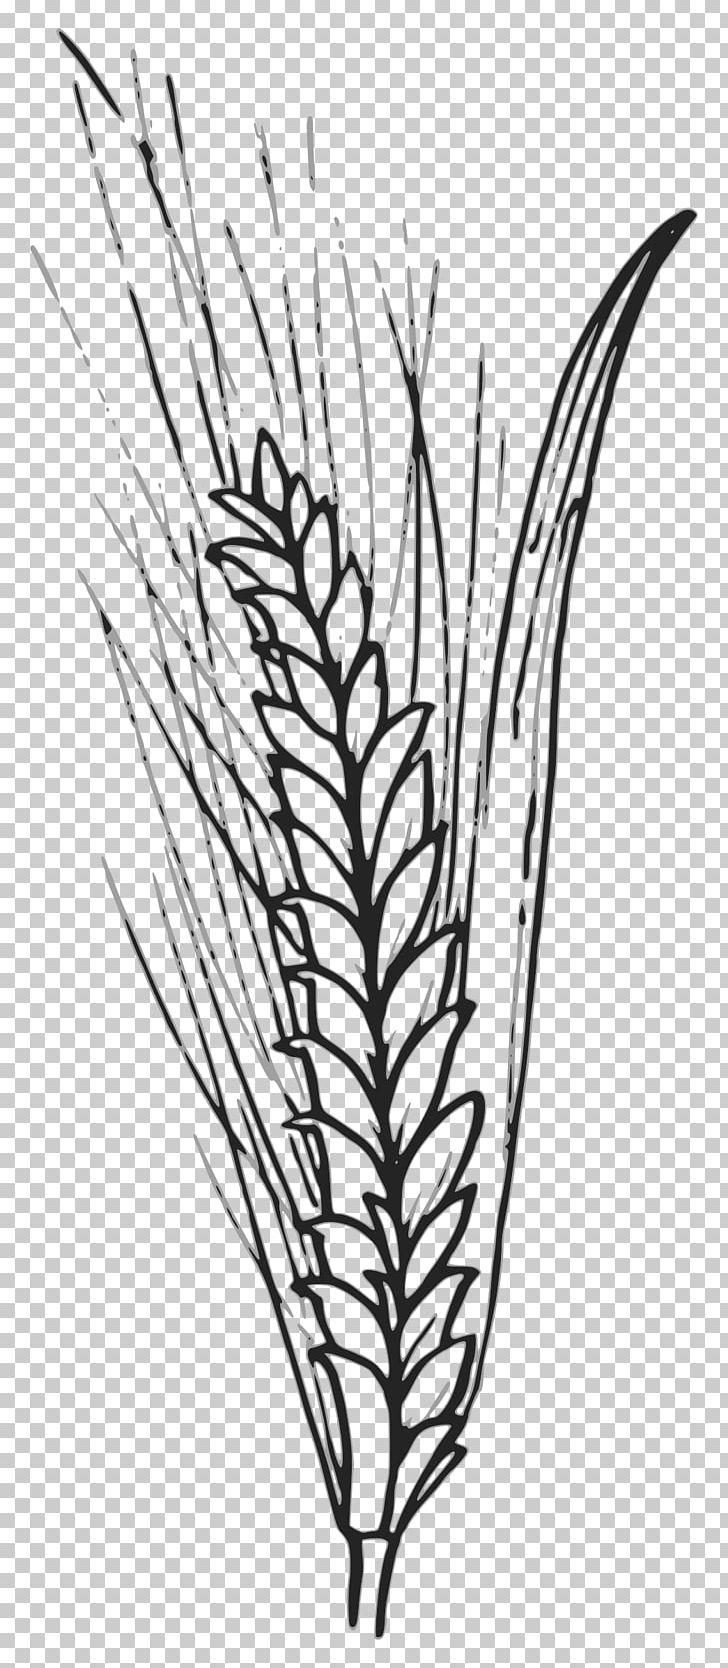 Wheat Grain Cereal PNG, Clipart, Artwork, Barley, Black And White, Branch, Cereal Free PNG Download